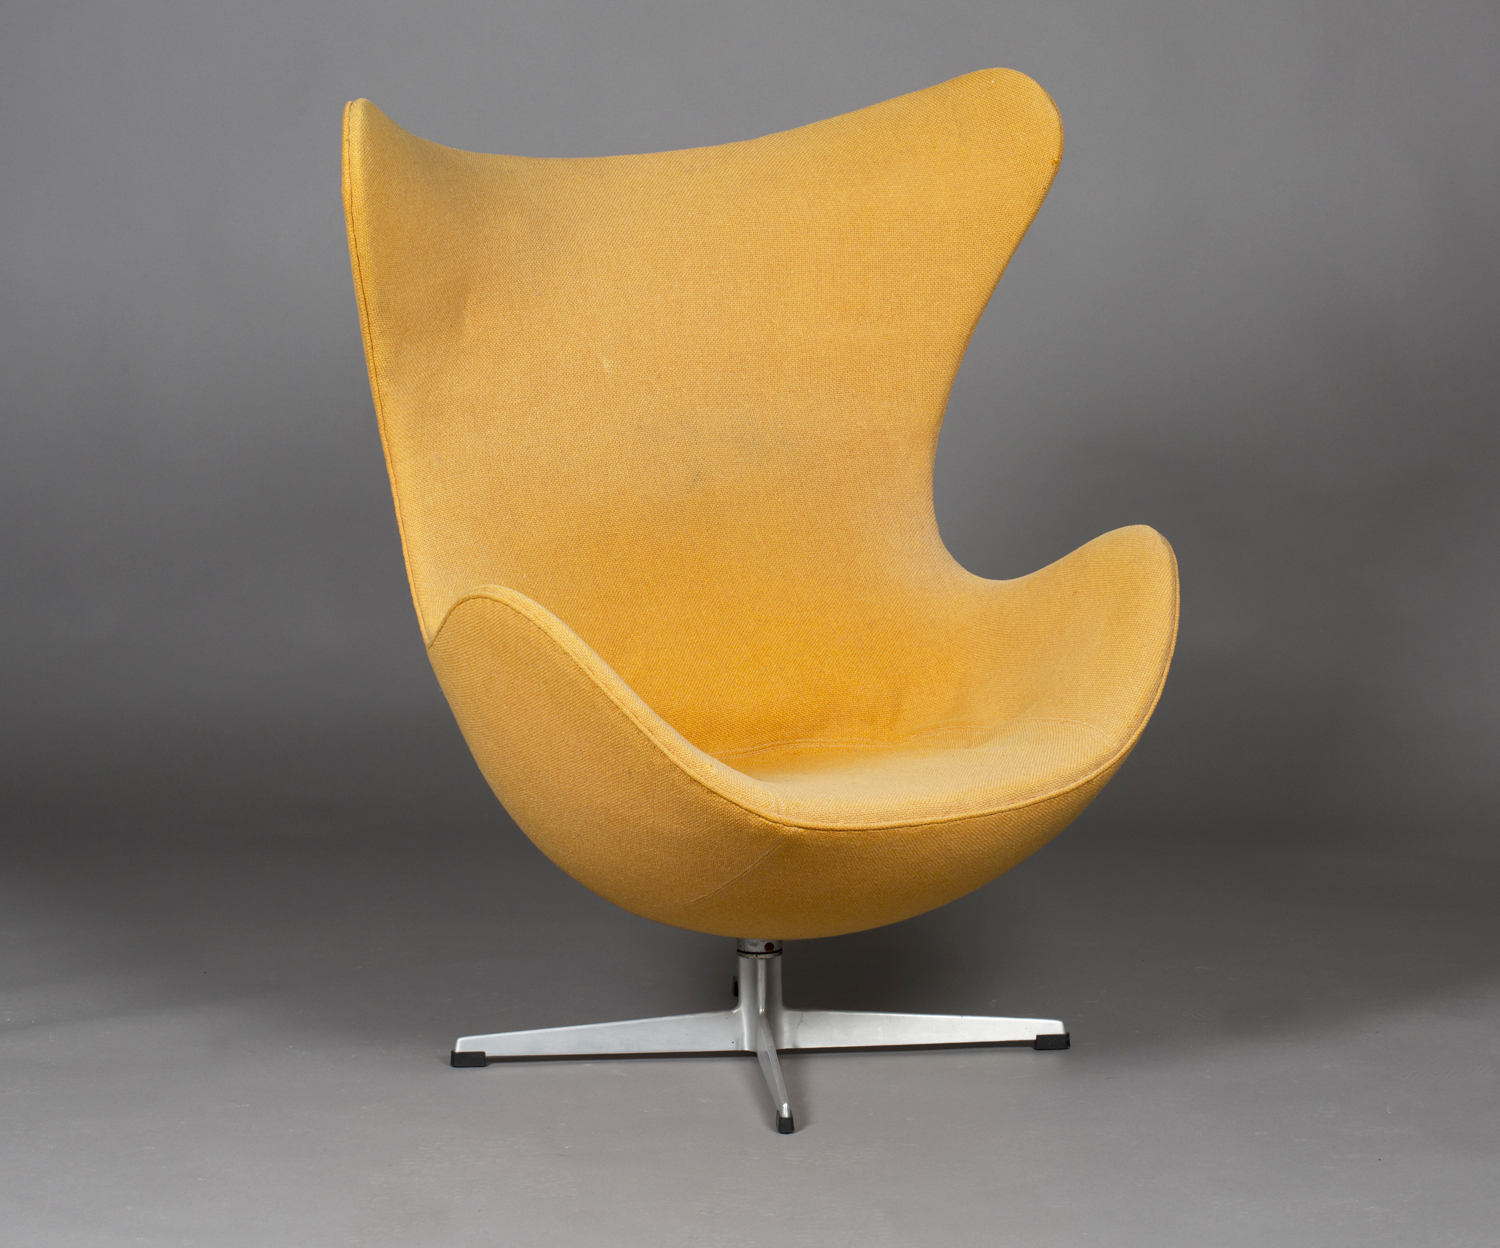 An Arne Jacobson 'Egg' chair, probably made by Fritz Hansen